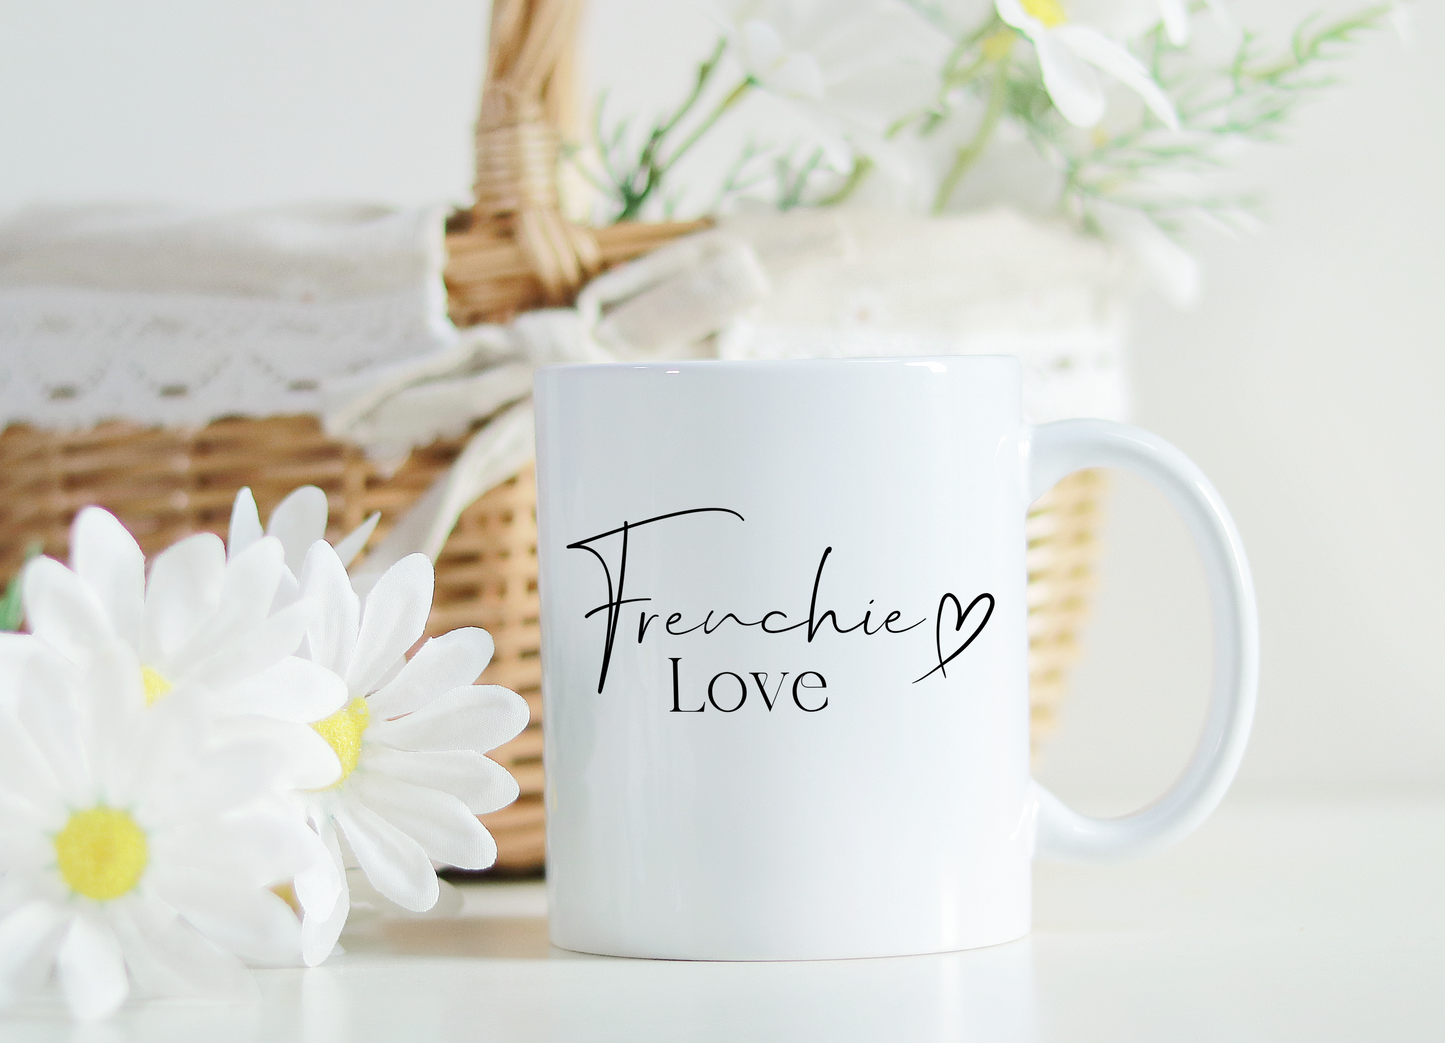 Cup favorite person personalized with name/gift for girlfriend/gift idea/gift favorite person